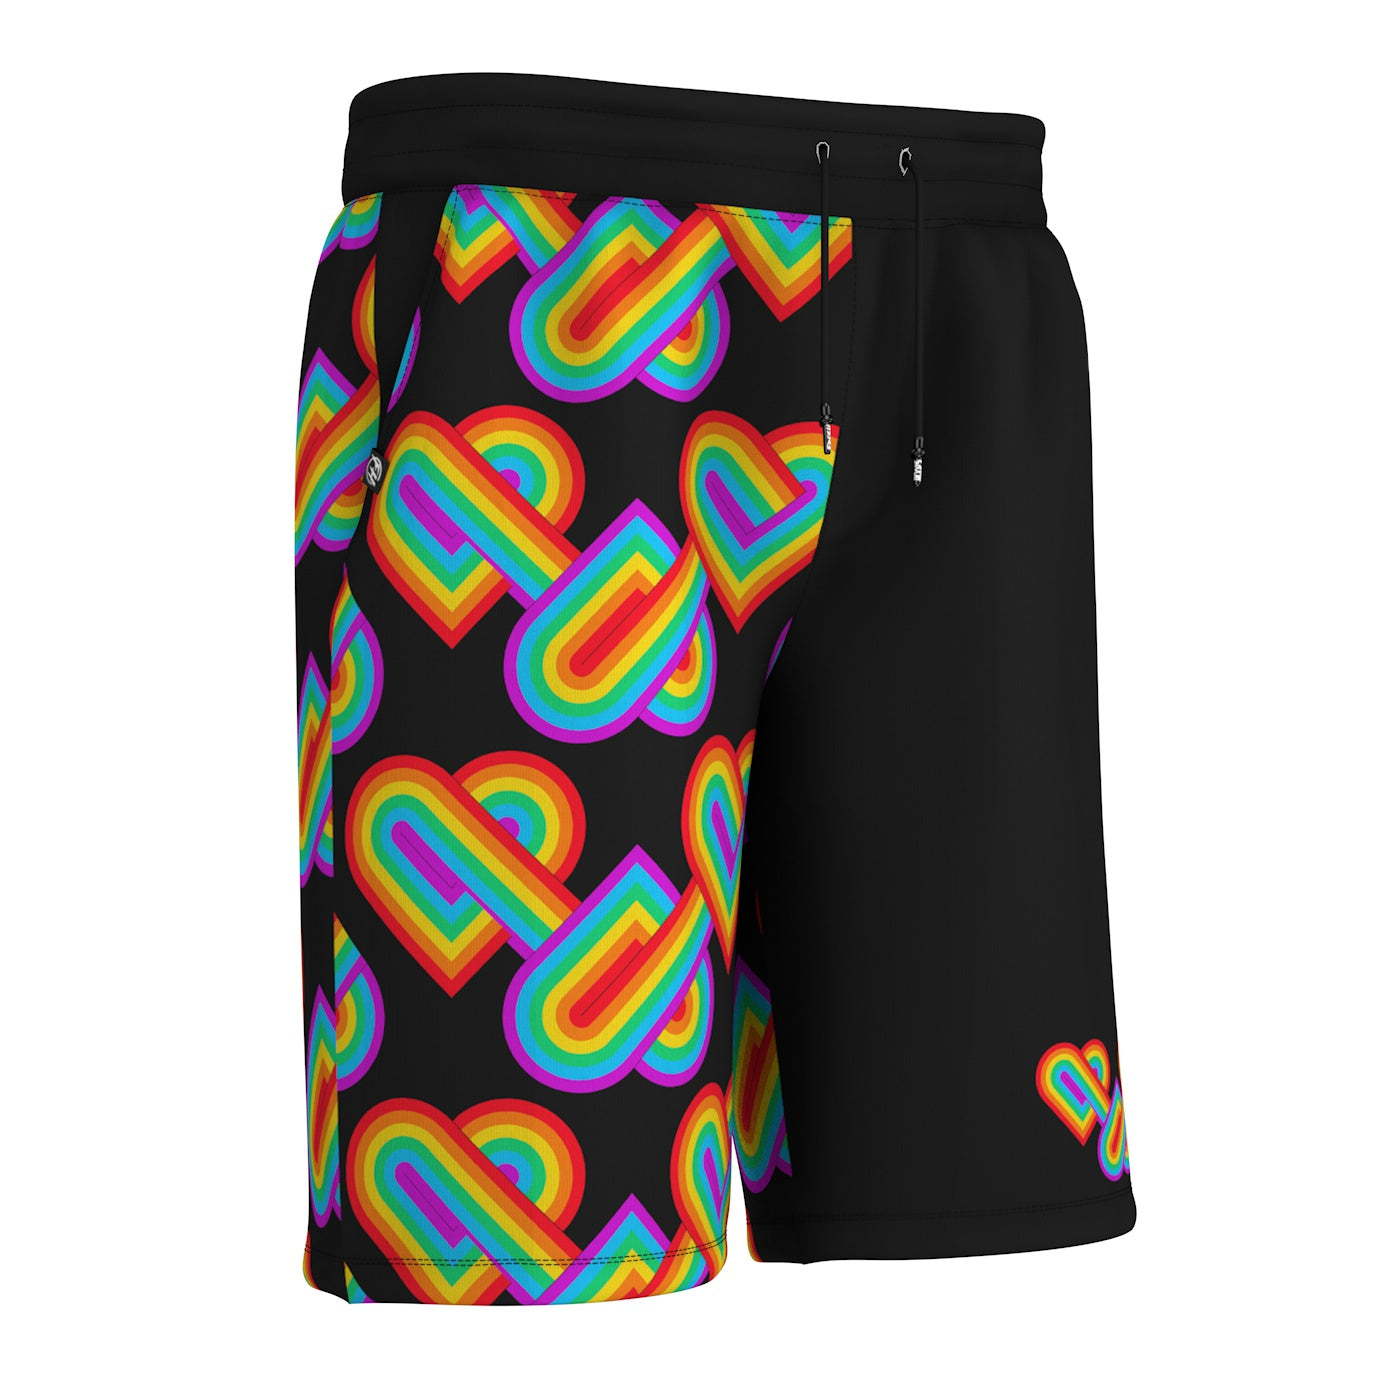 Connected Hearts Shorts